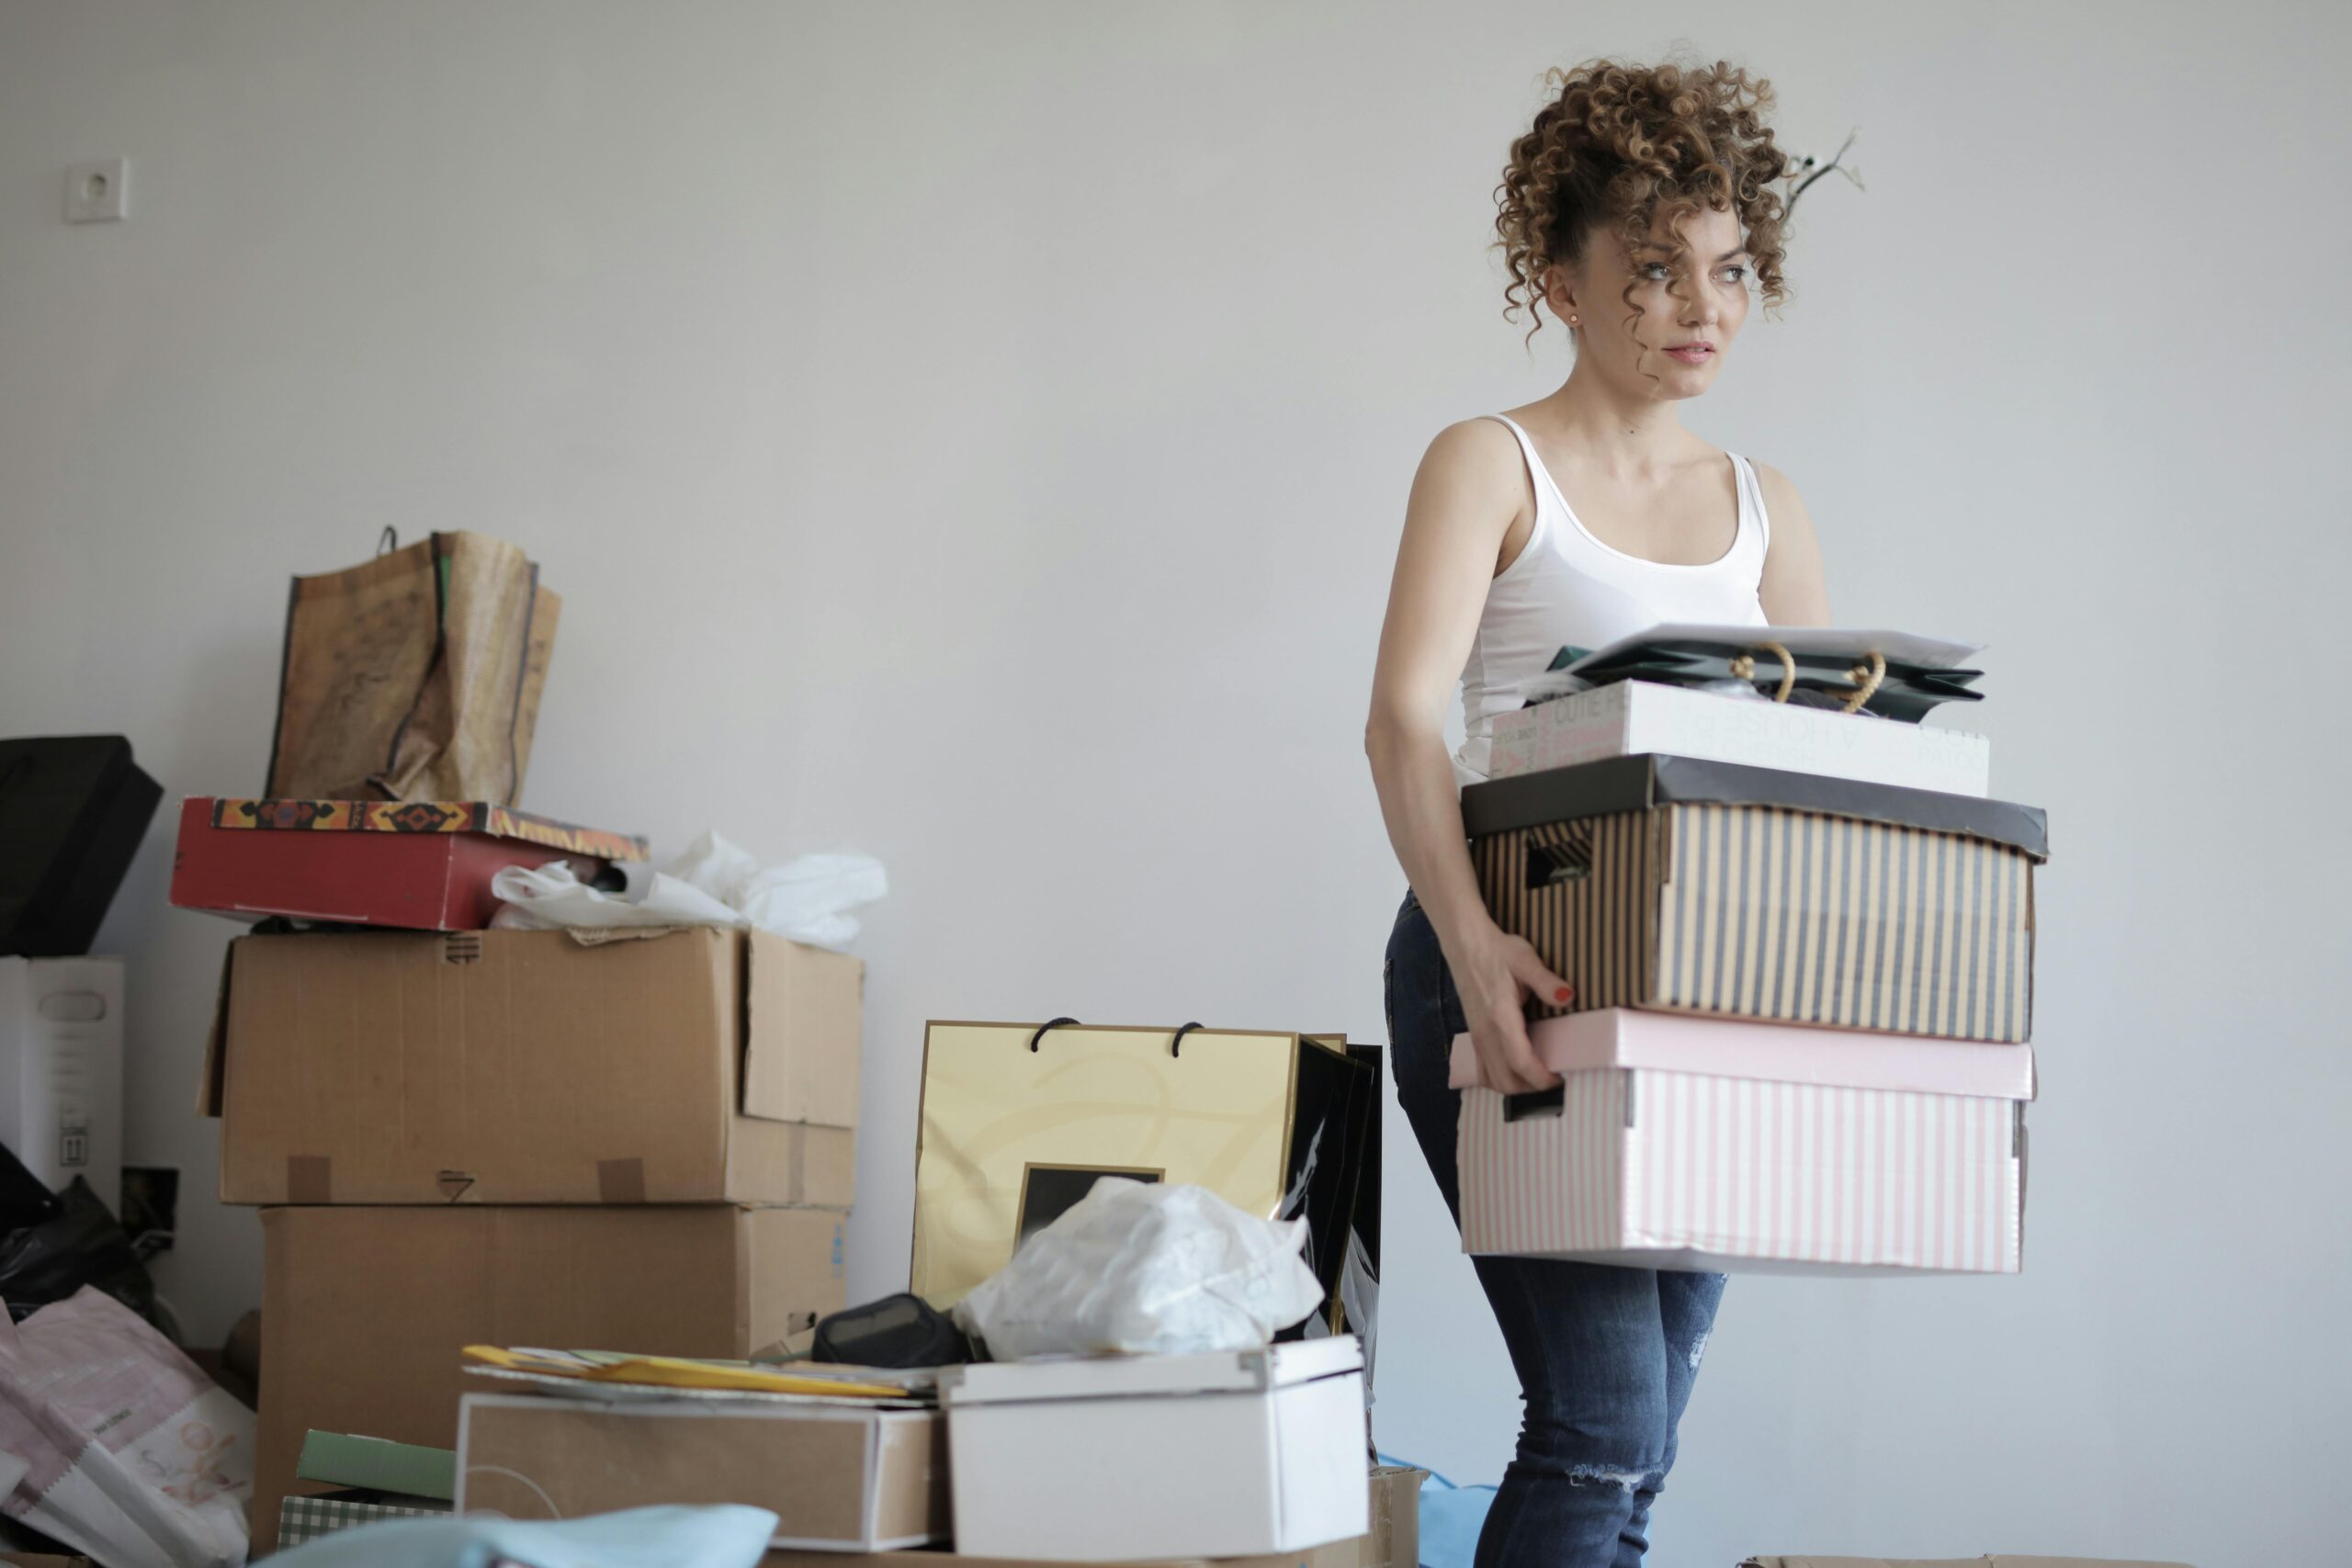 The psychology of clutter